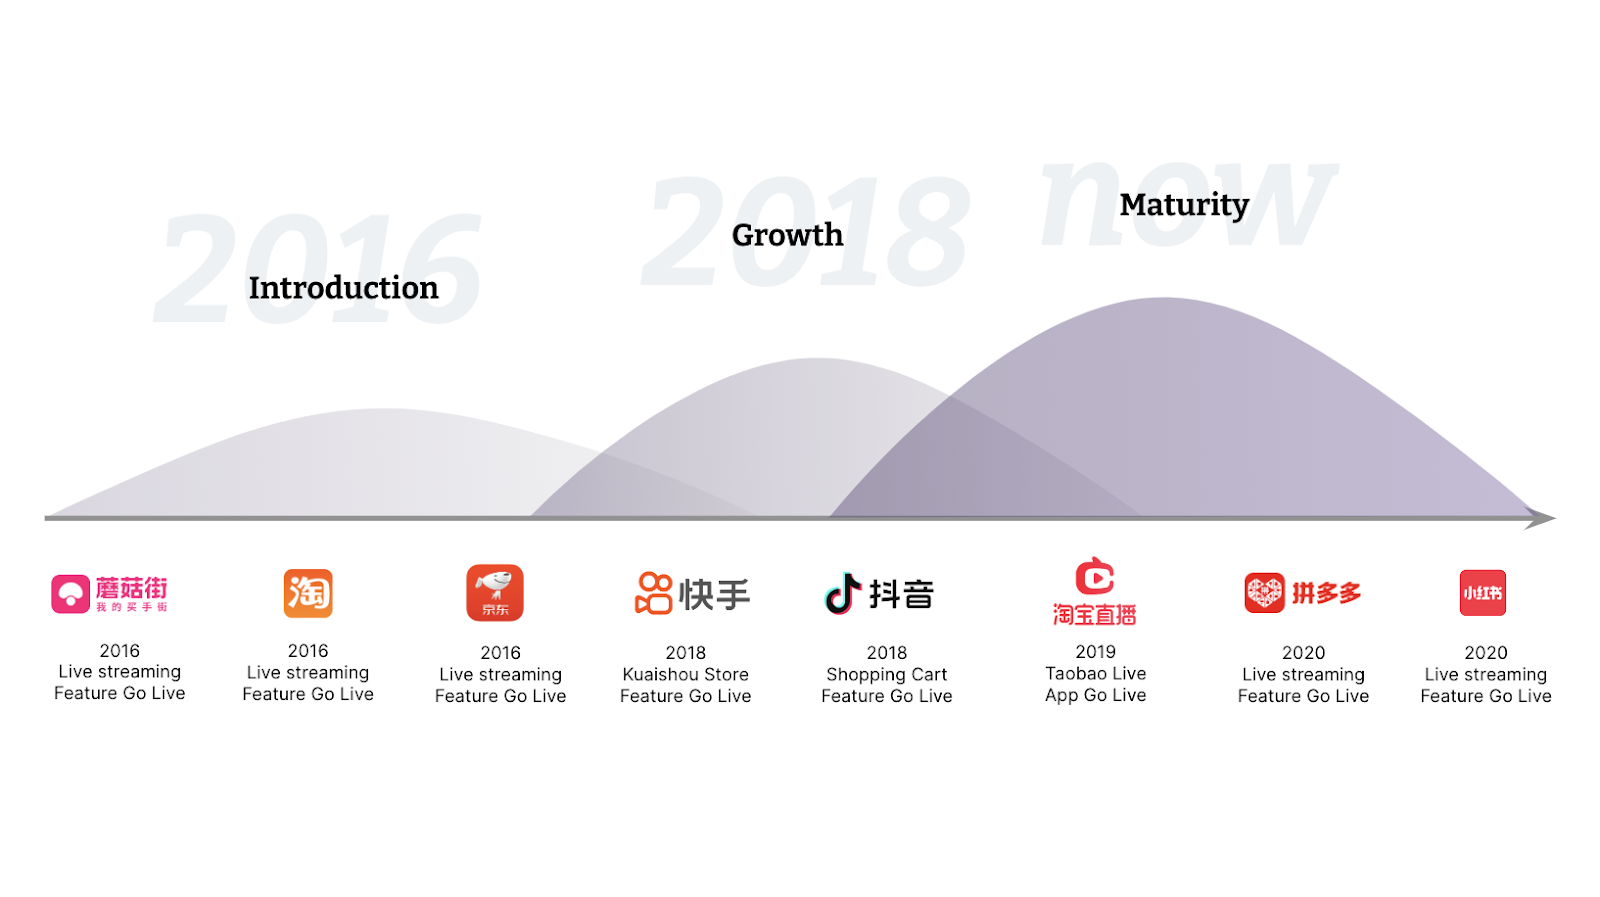 Timeline of live e-commerce in China